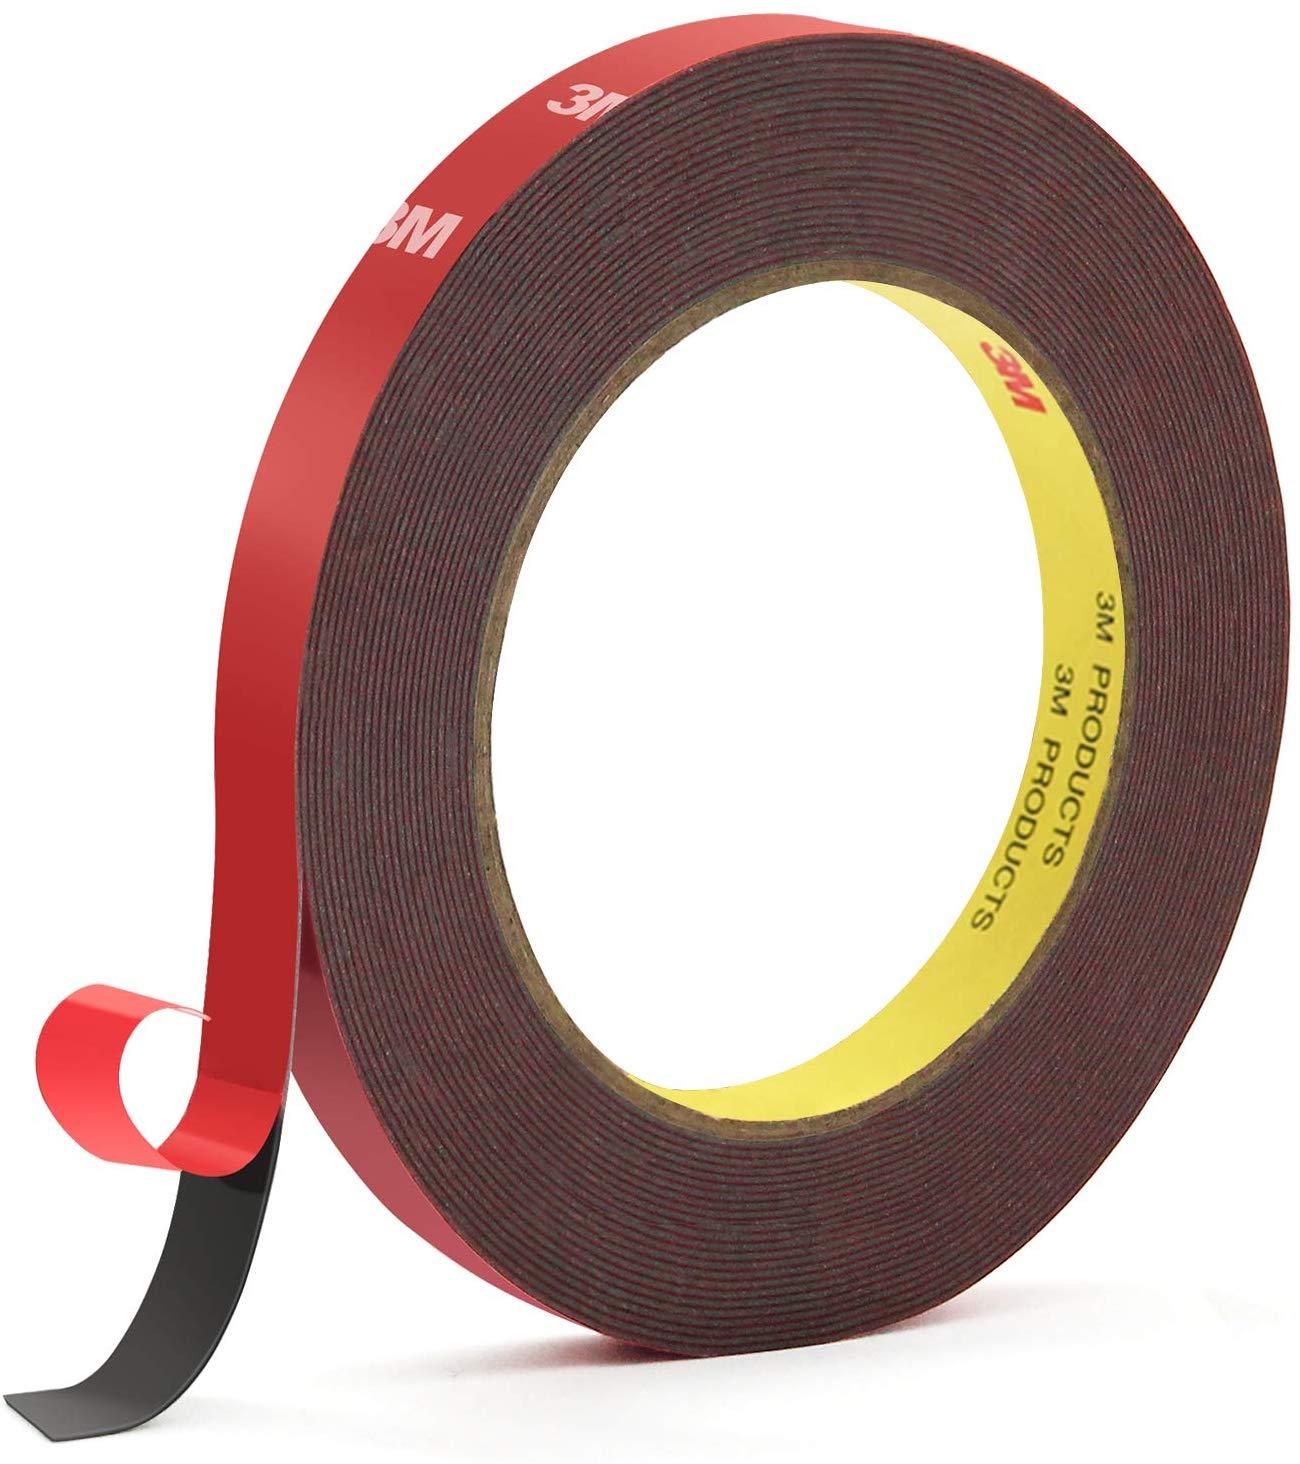 3M Red Ultra Strong Double Sided Tape Roll, 16 feet roll